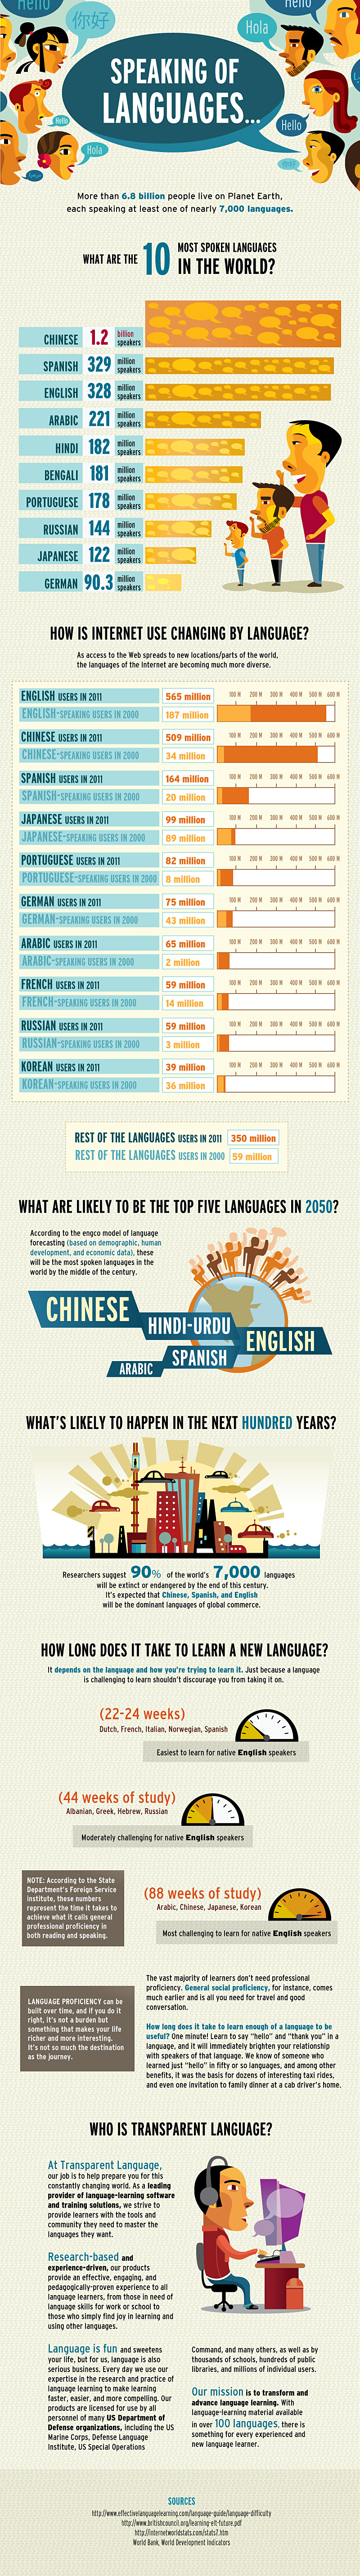 What are the 10 most spoken languages in the world?